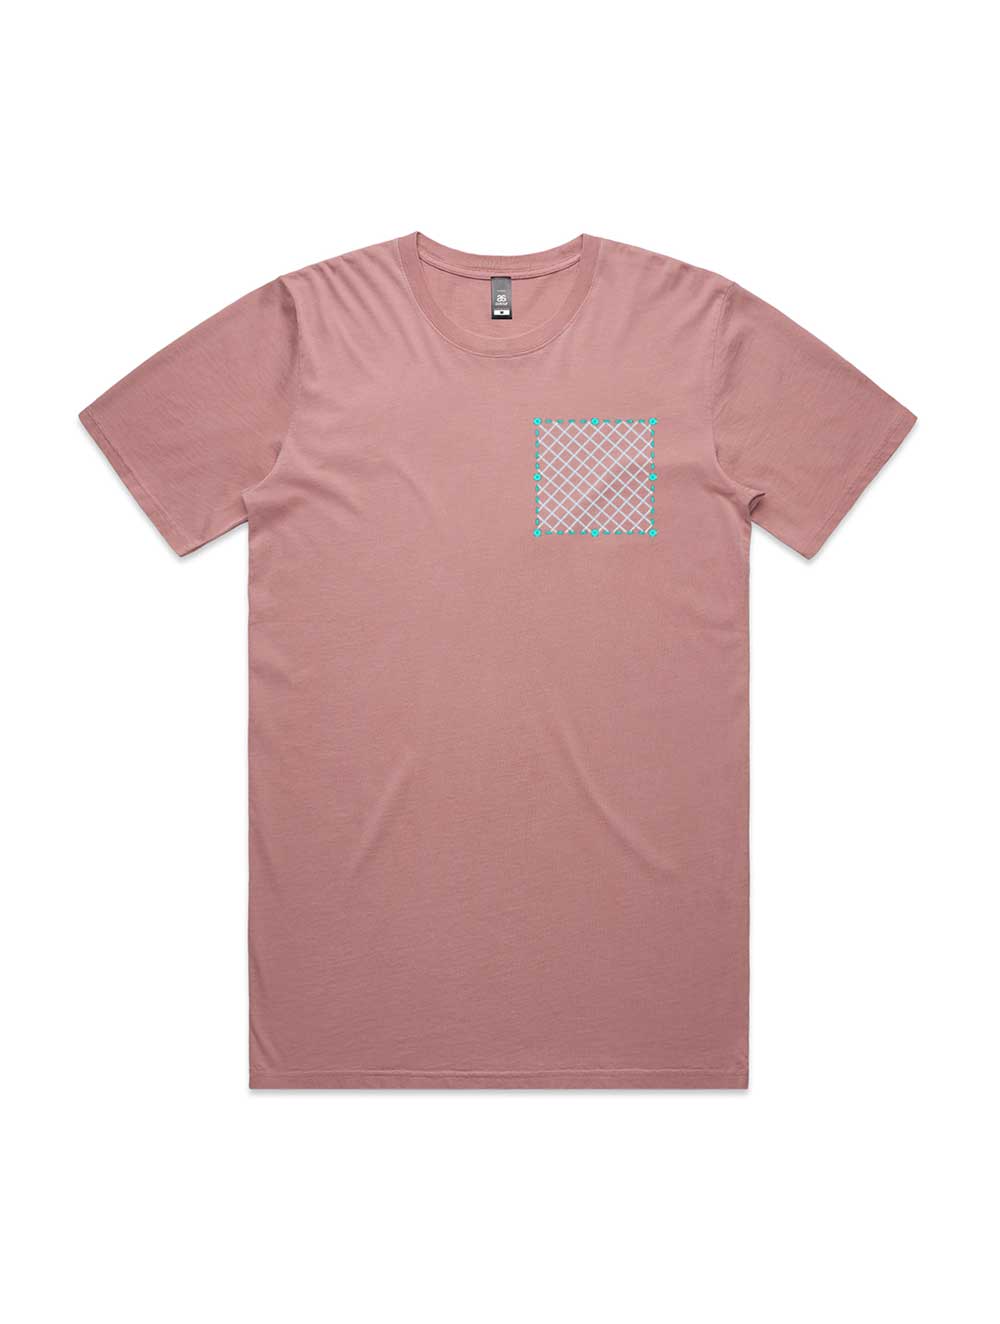 Embroidered AS Colour Staple Faded Tee